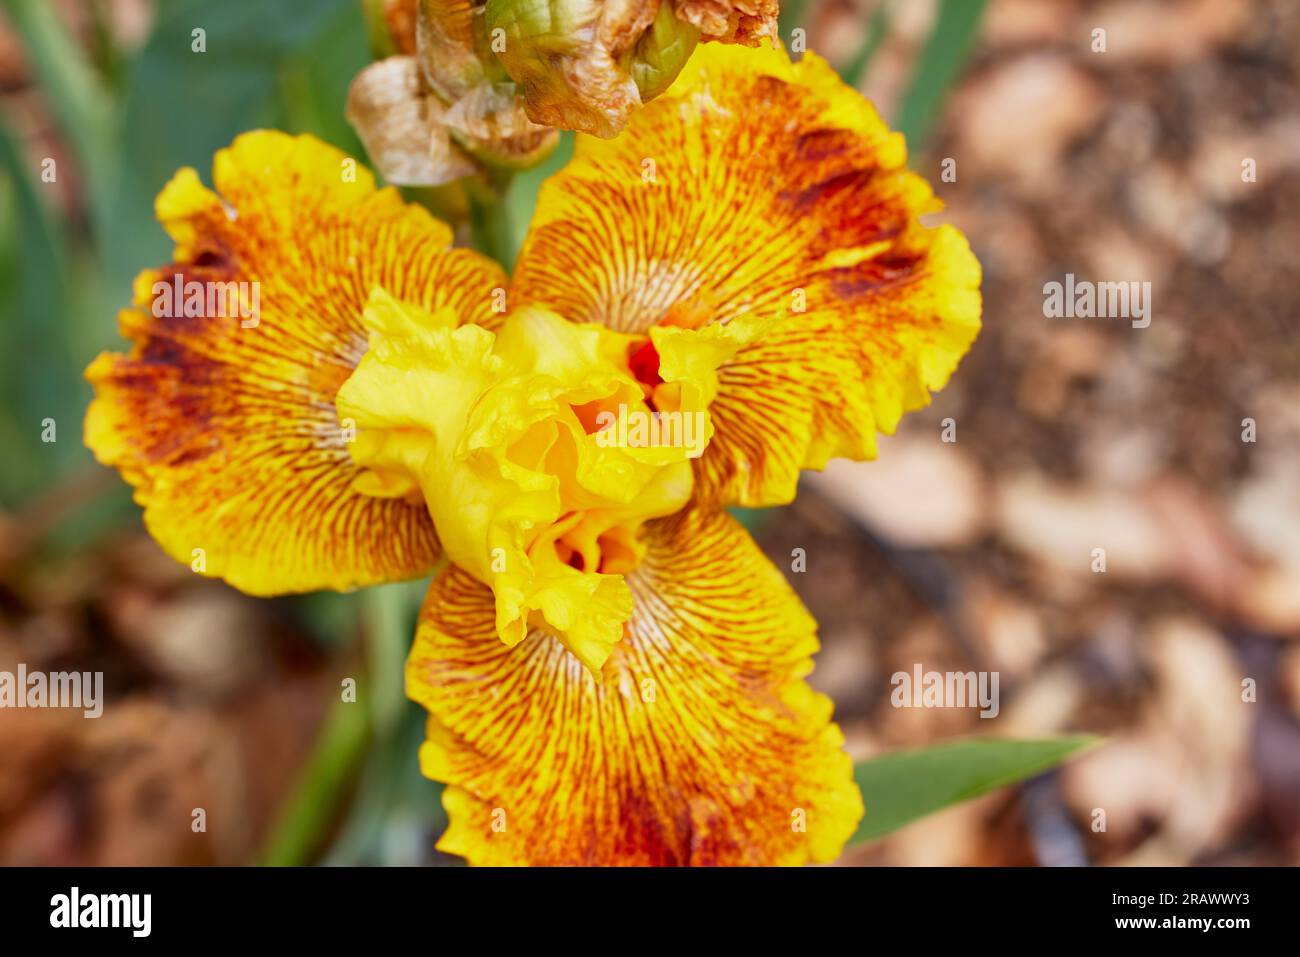 Close up of a Calizona Gold Iris Flower with Shallow depth of Field Stock Photo